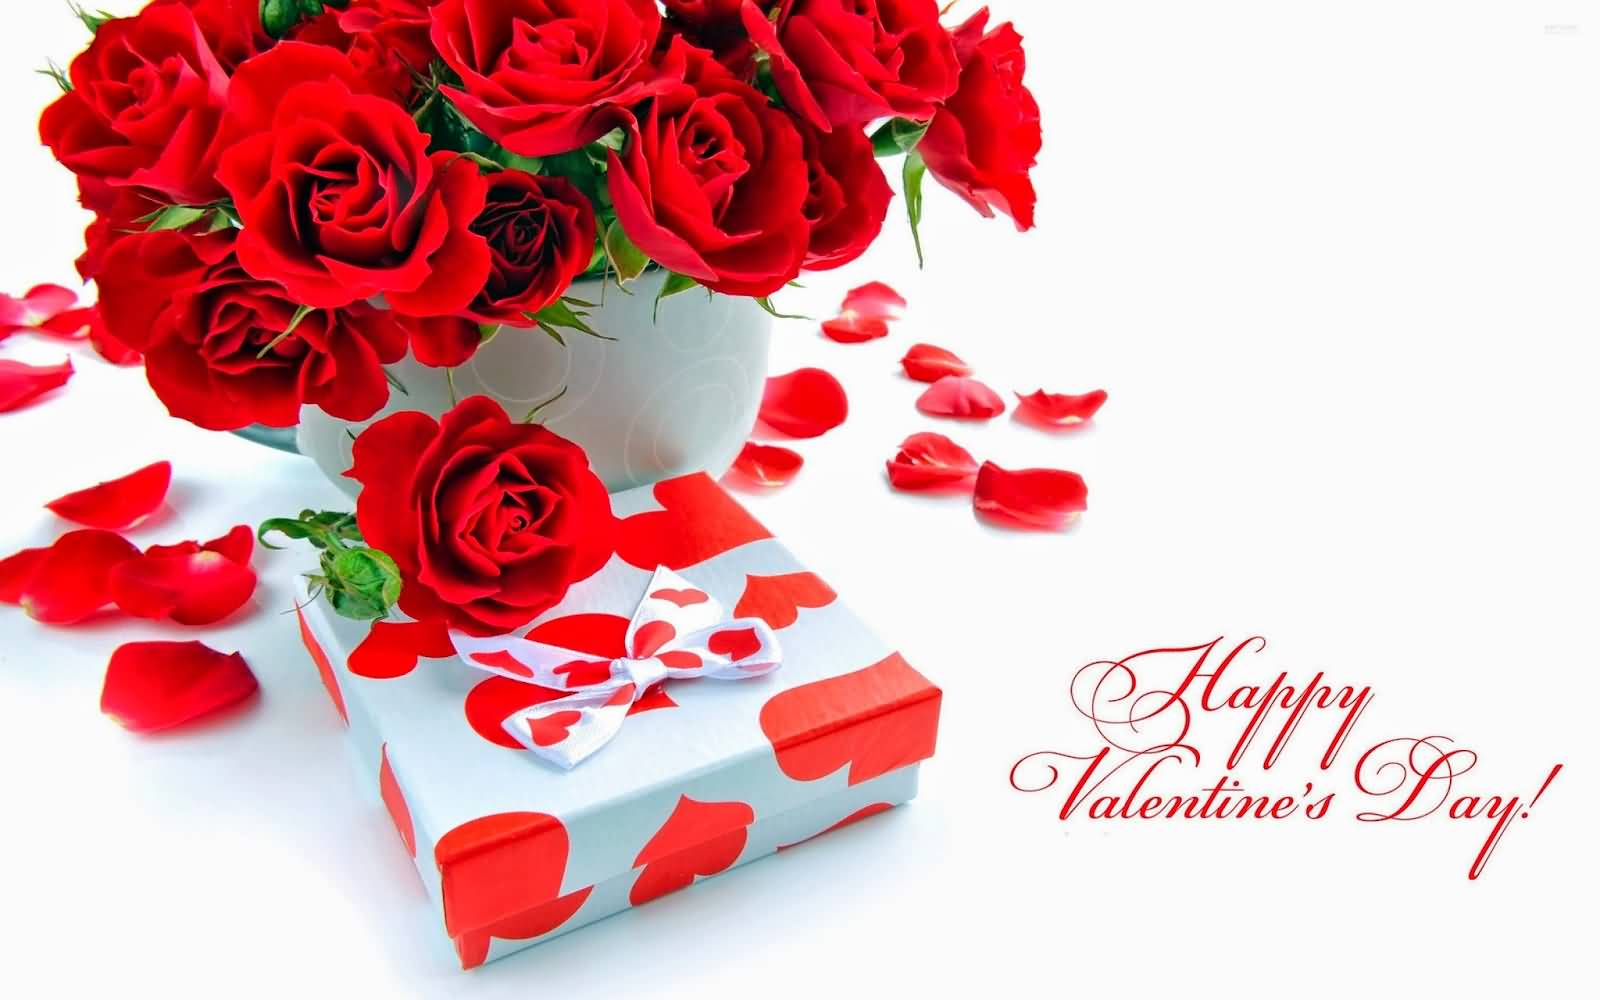 Happy Valentine’s Day Flowers And Gift Box